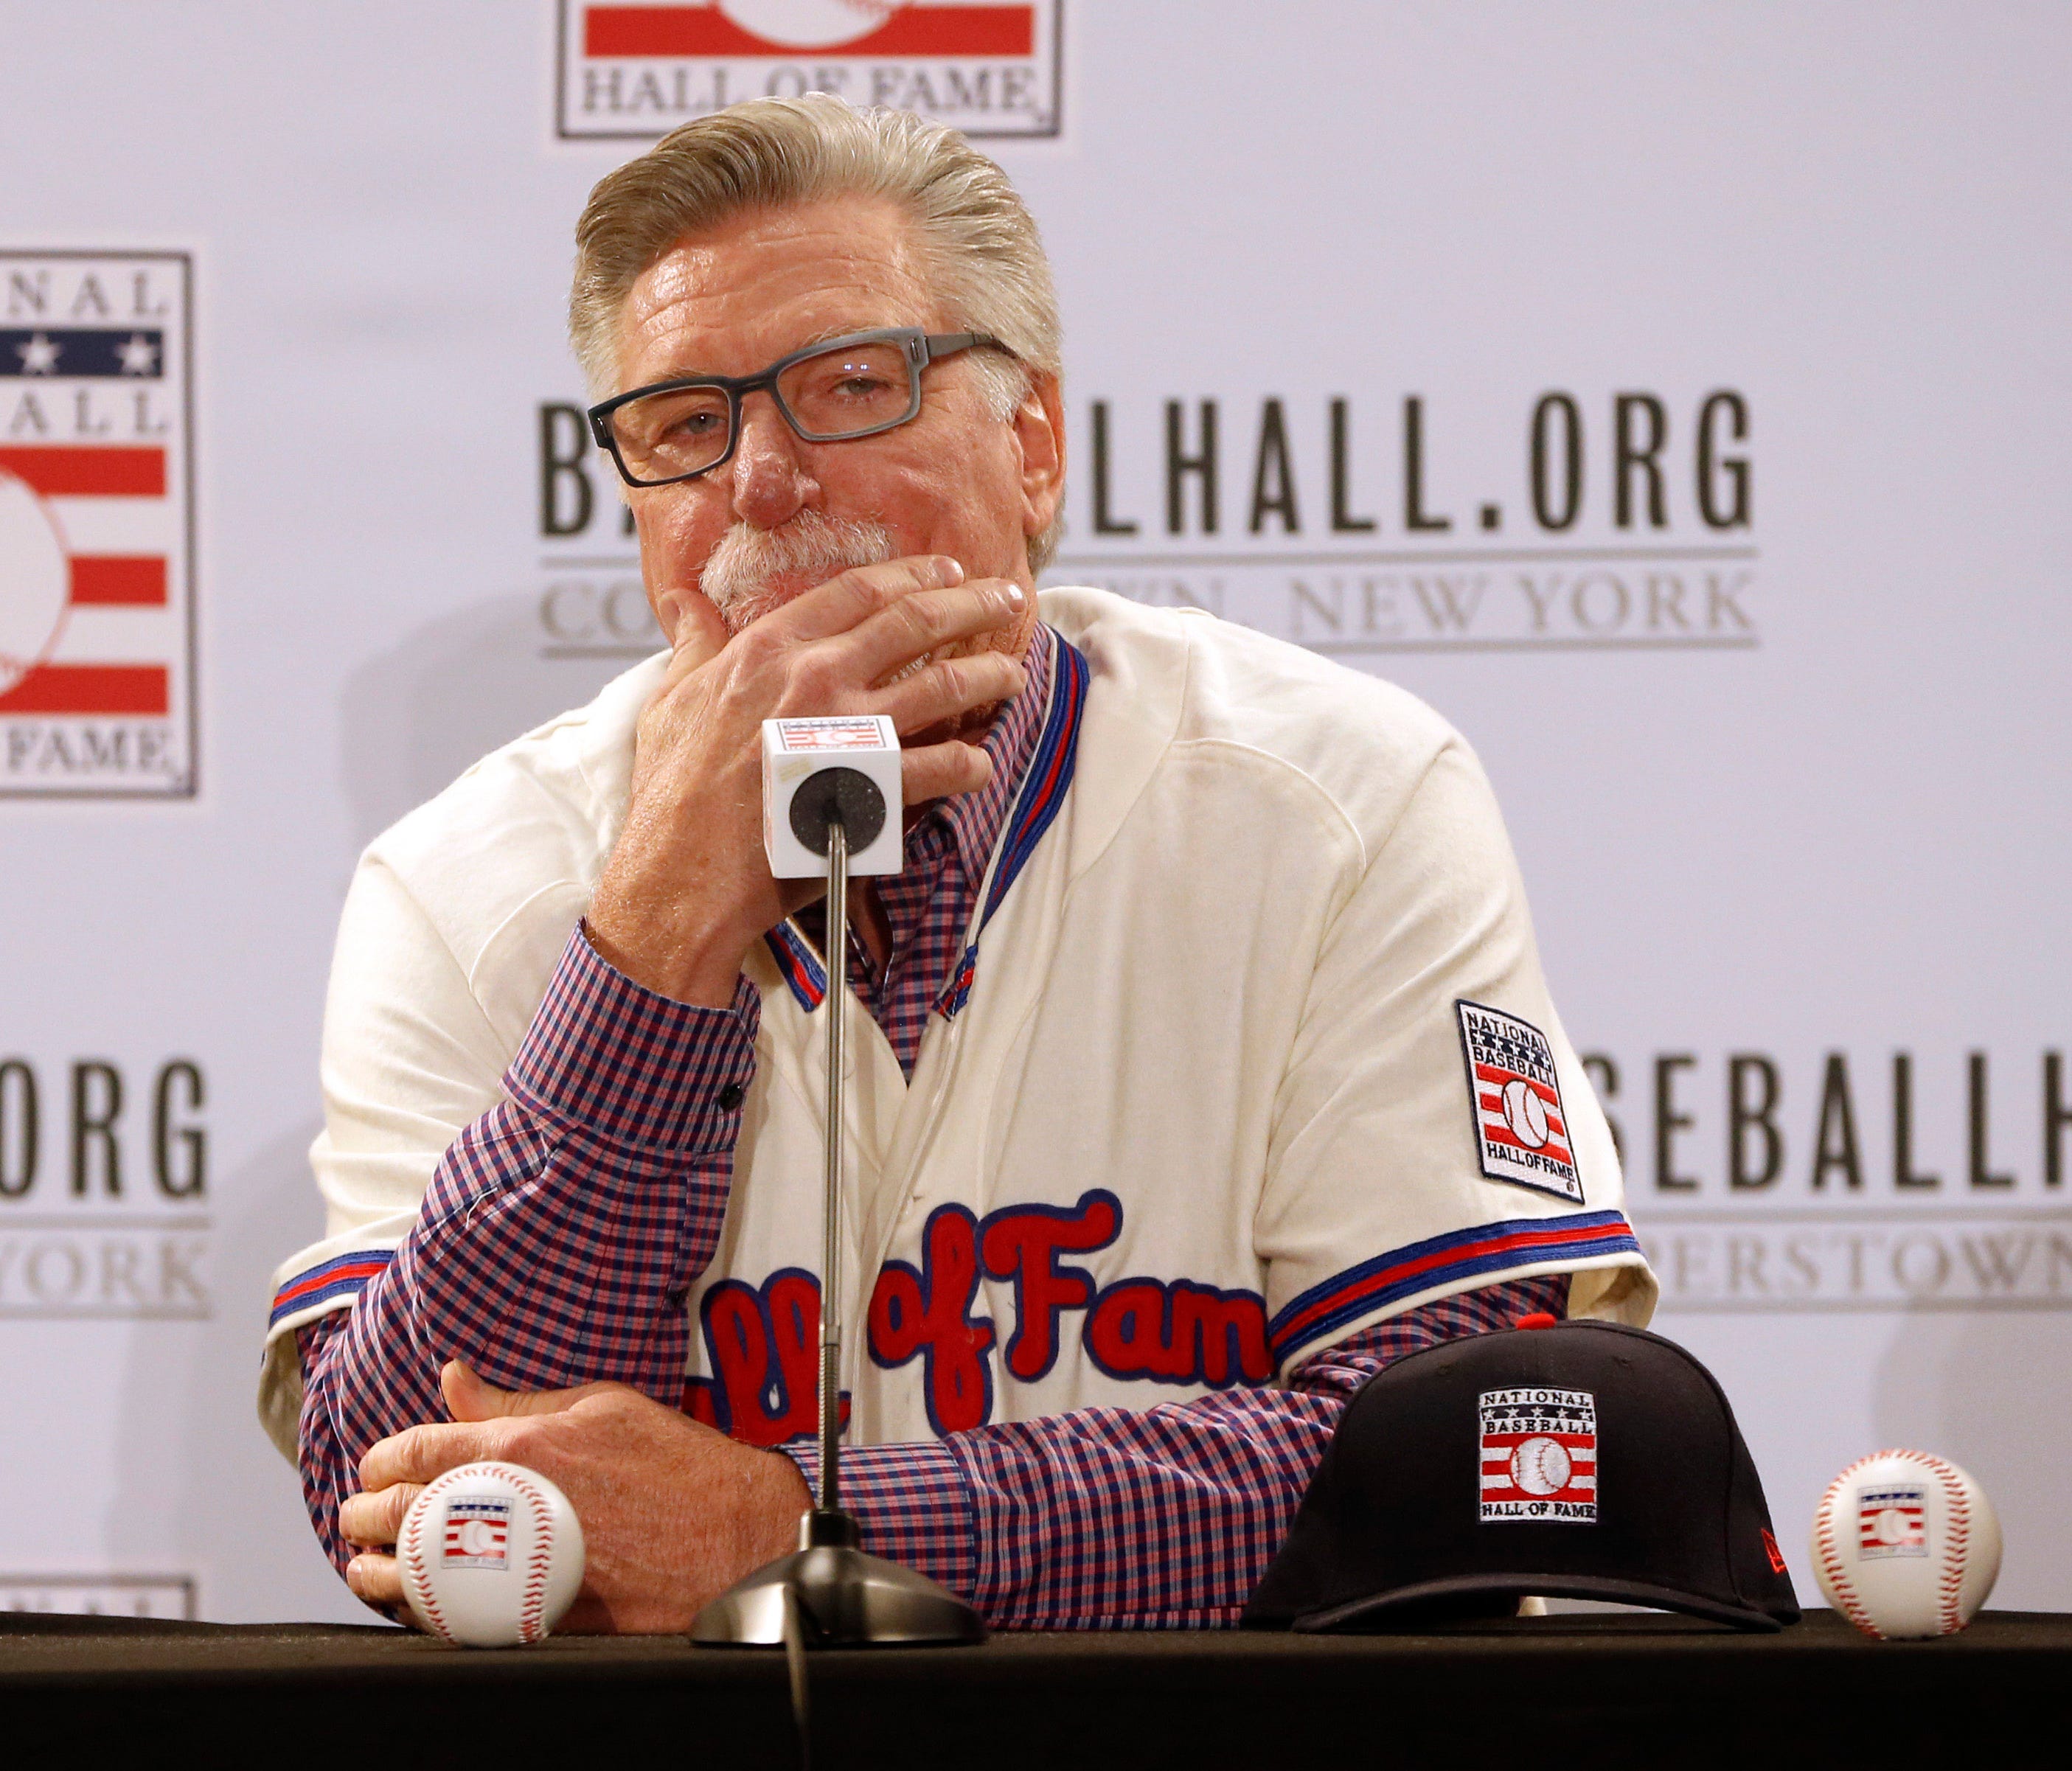 Jack Morris was elected into the Hall of Fame by the Modern Era committee on Sunday.